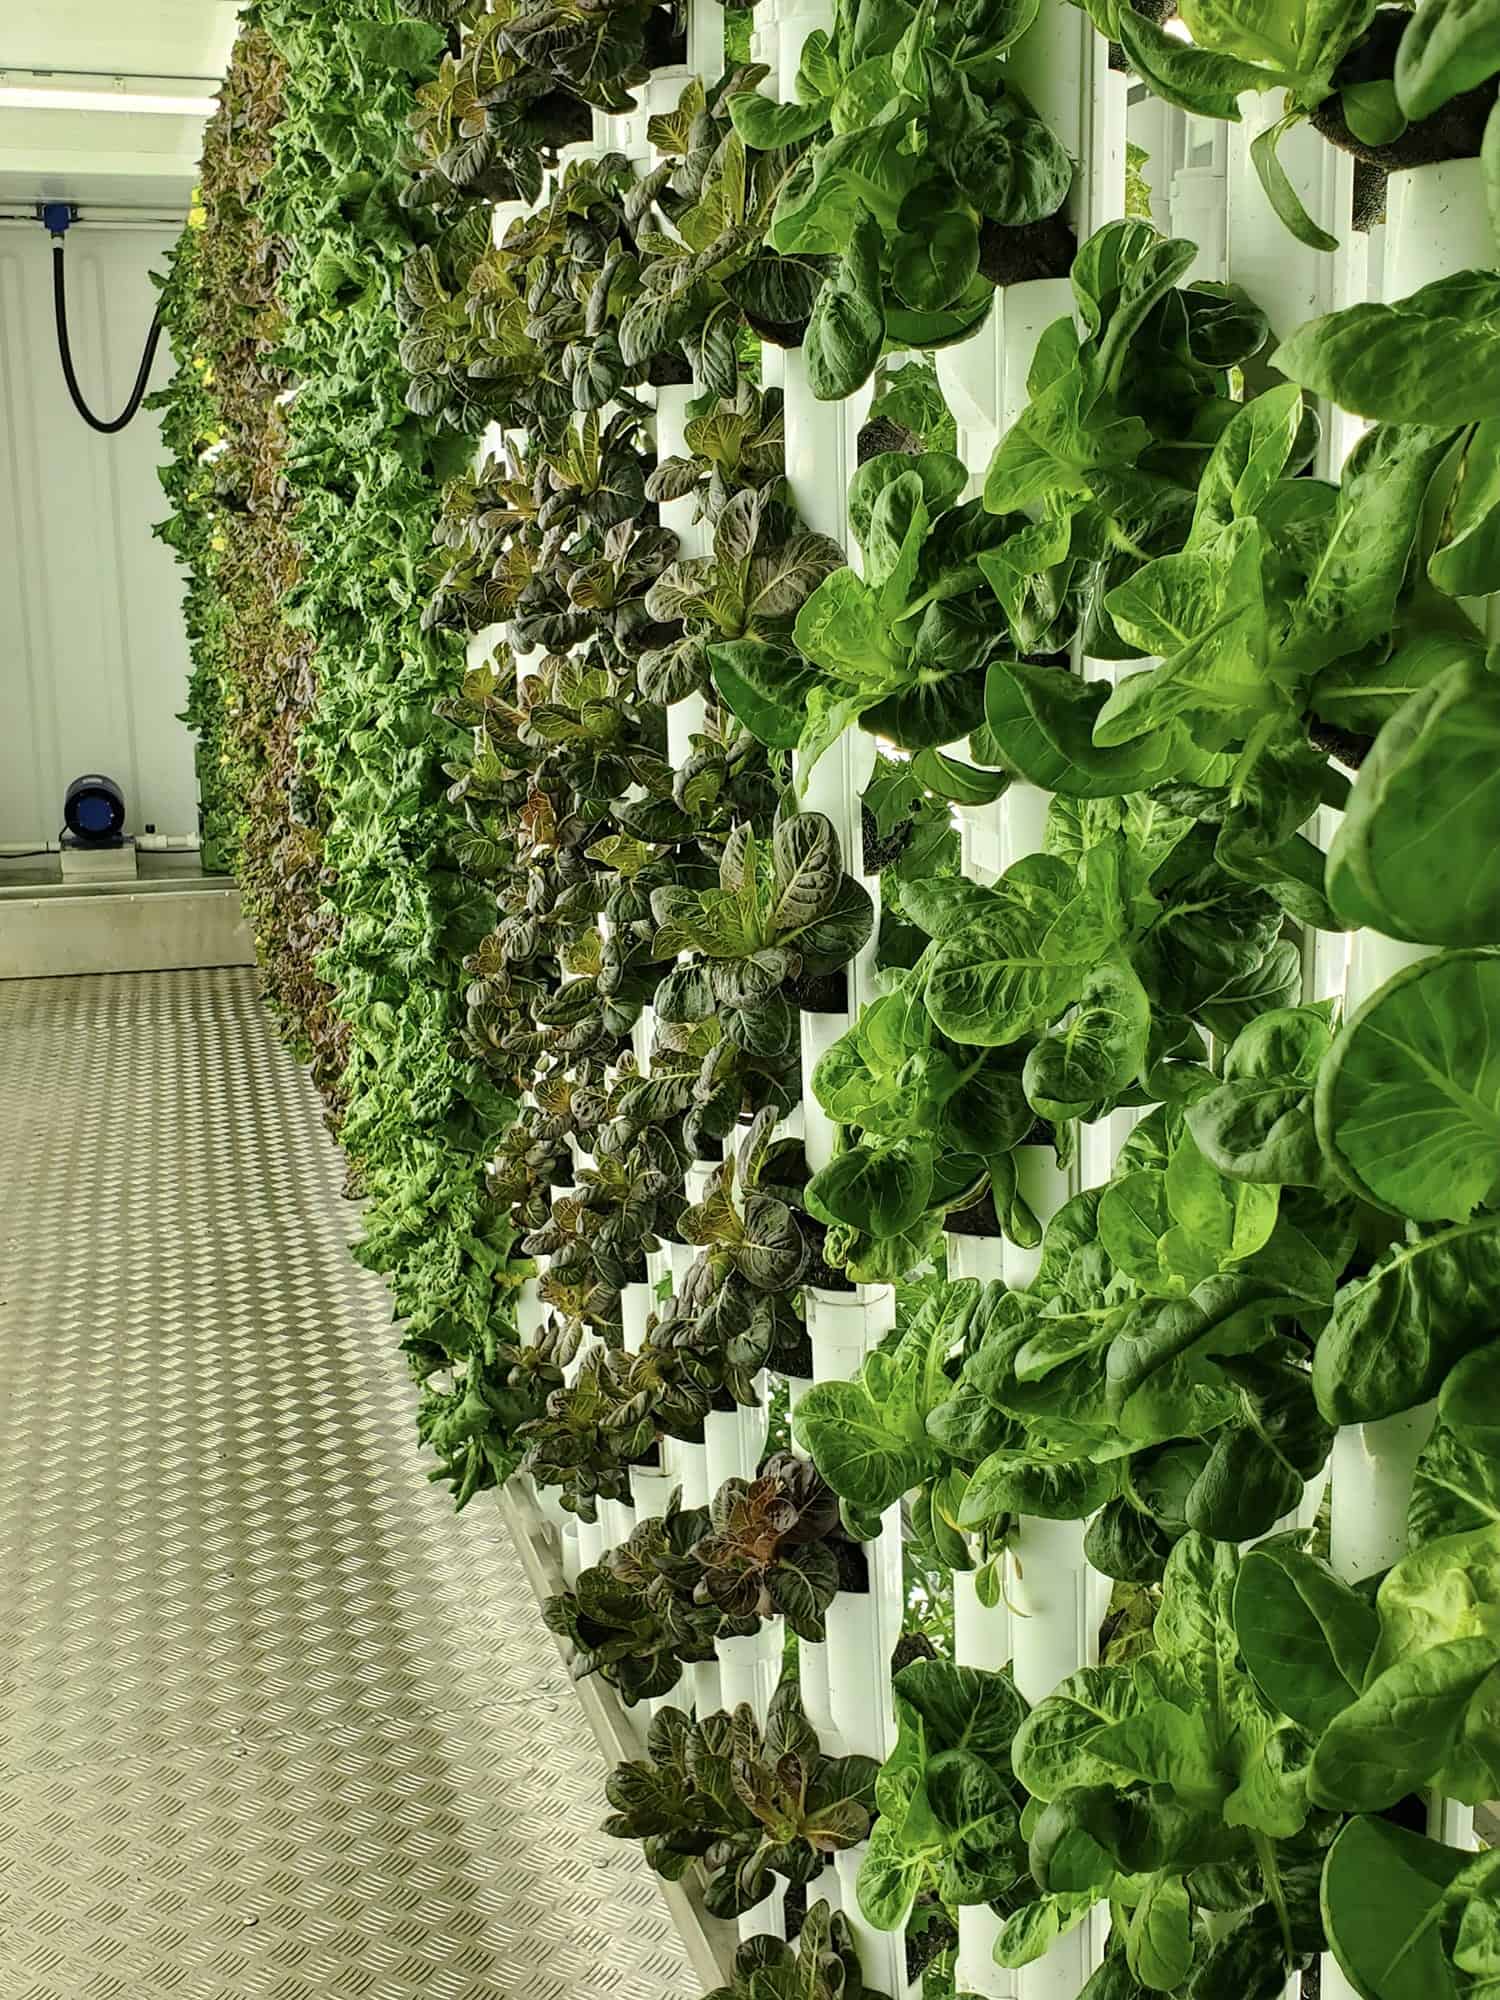 Farming Solutions for a Sustainable (and Less Scary) Future